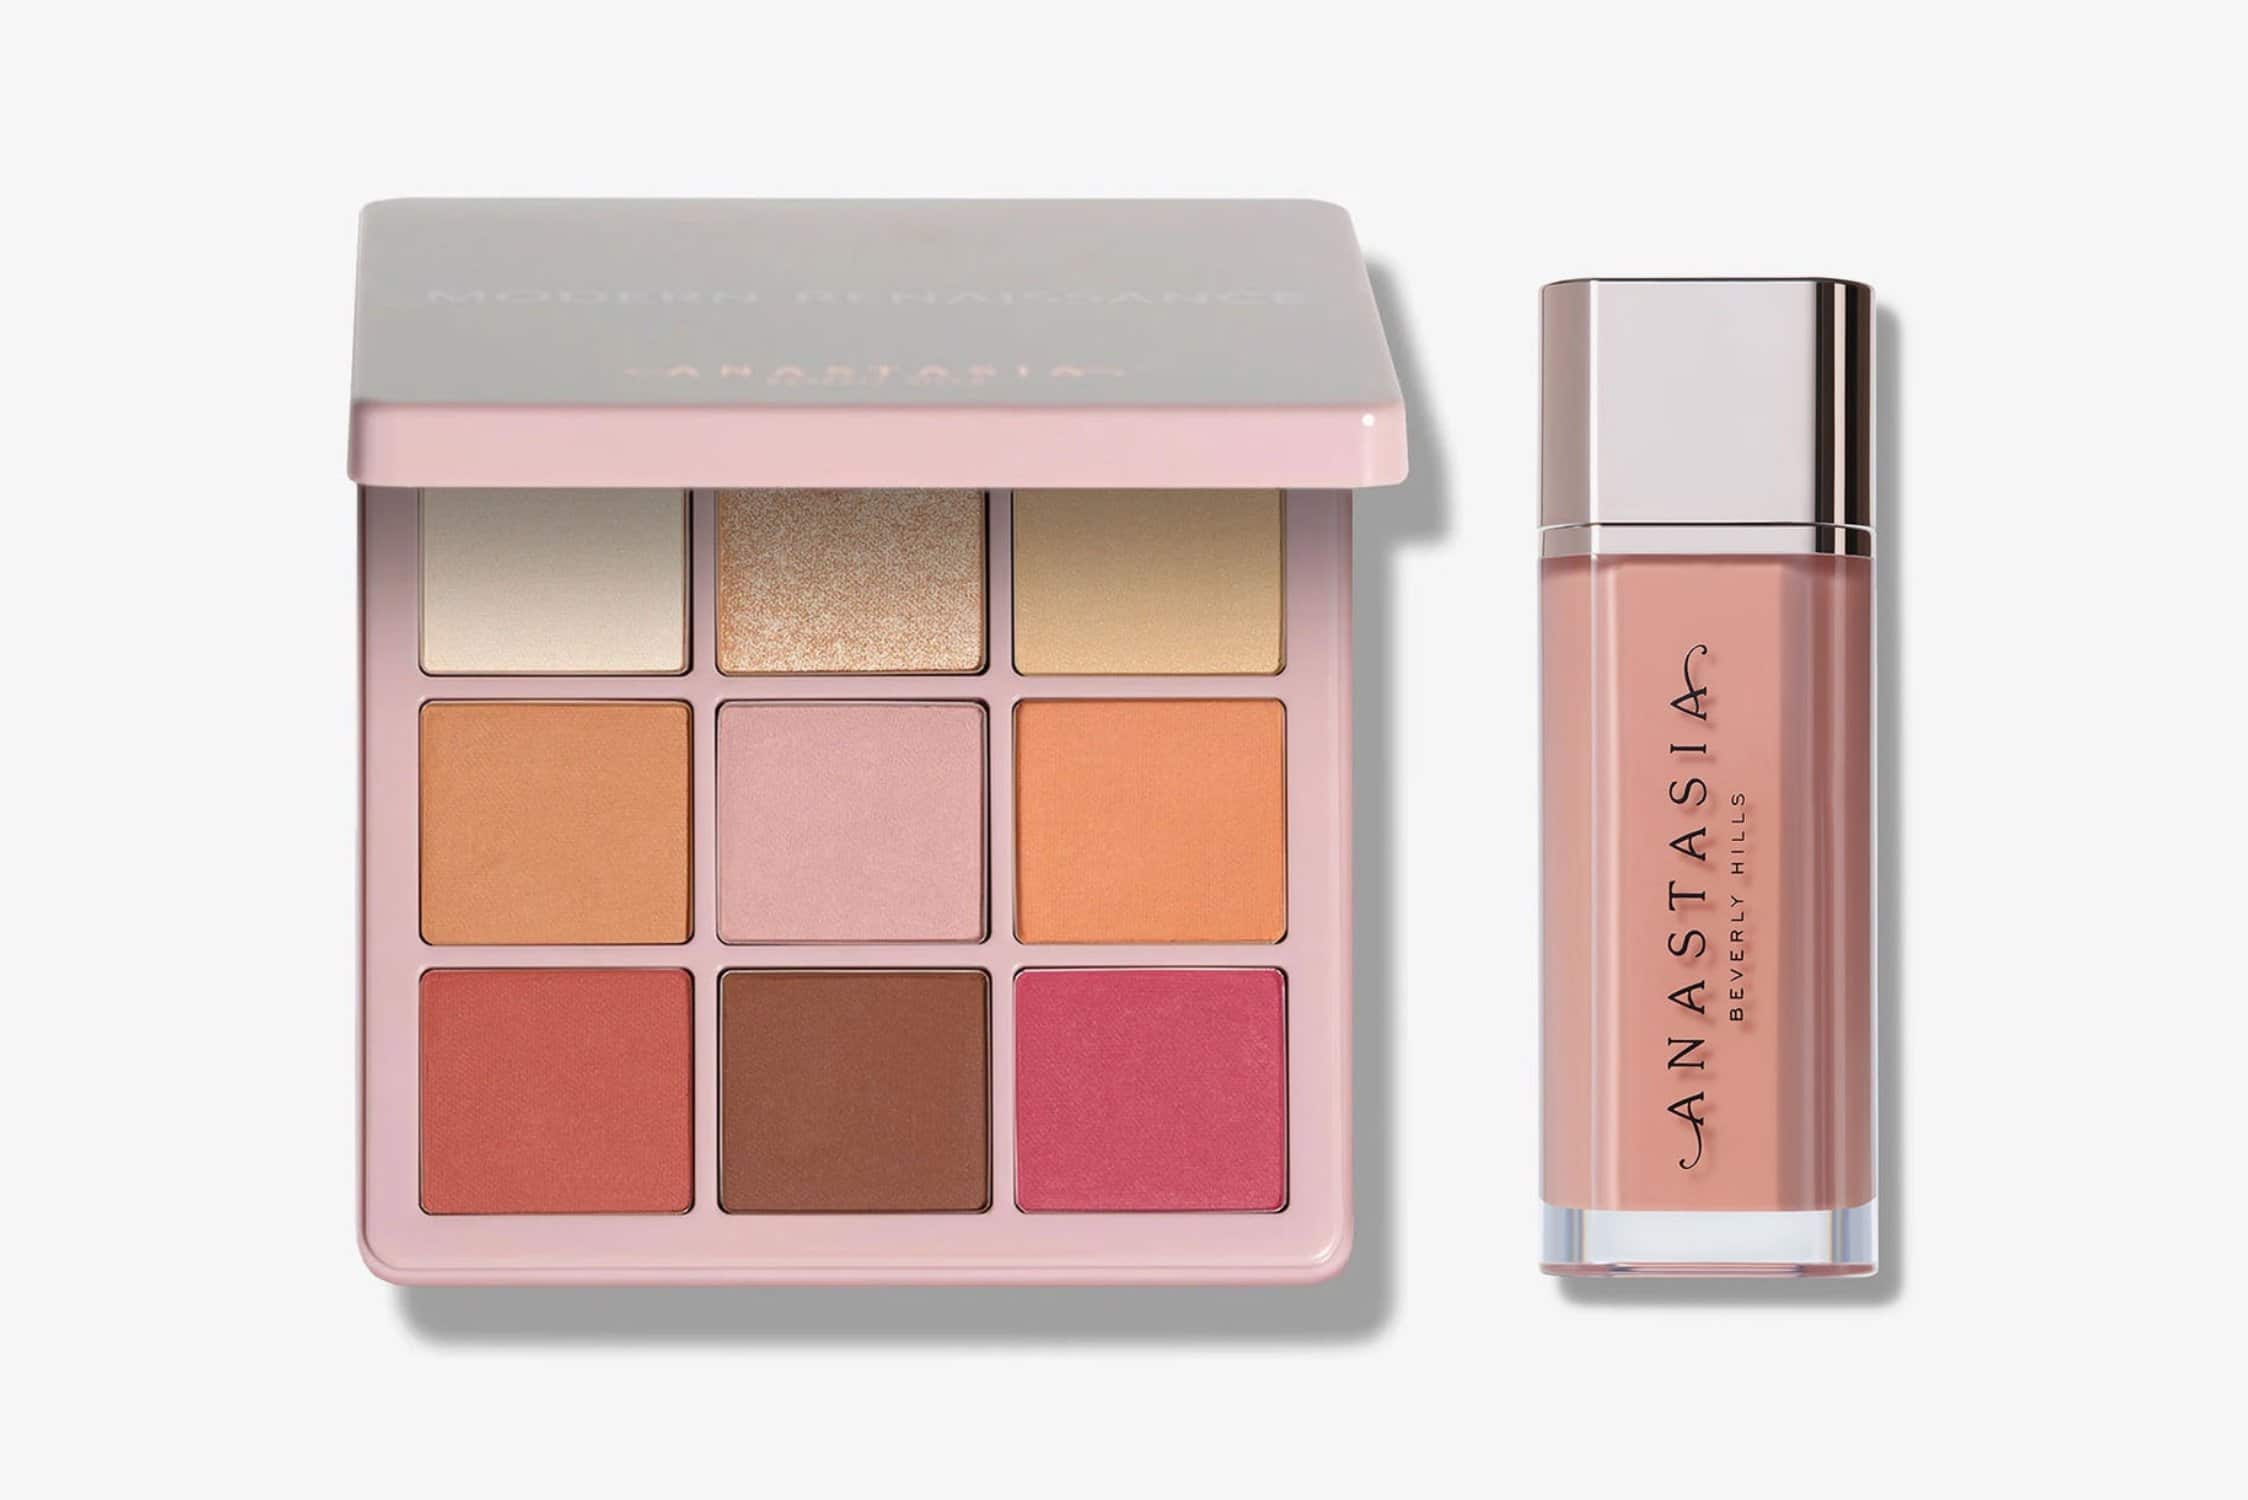 Mother's Day, gift guide, Mother's Day gifts, Anastasia Beverly Hills